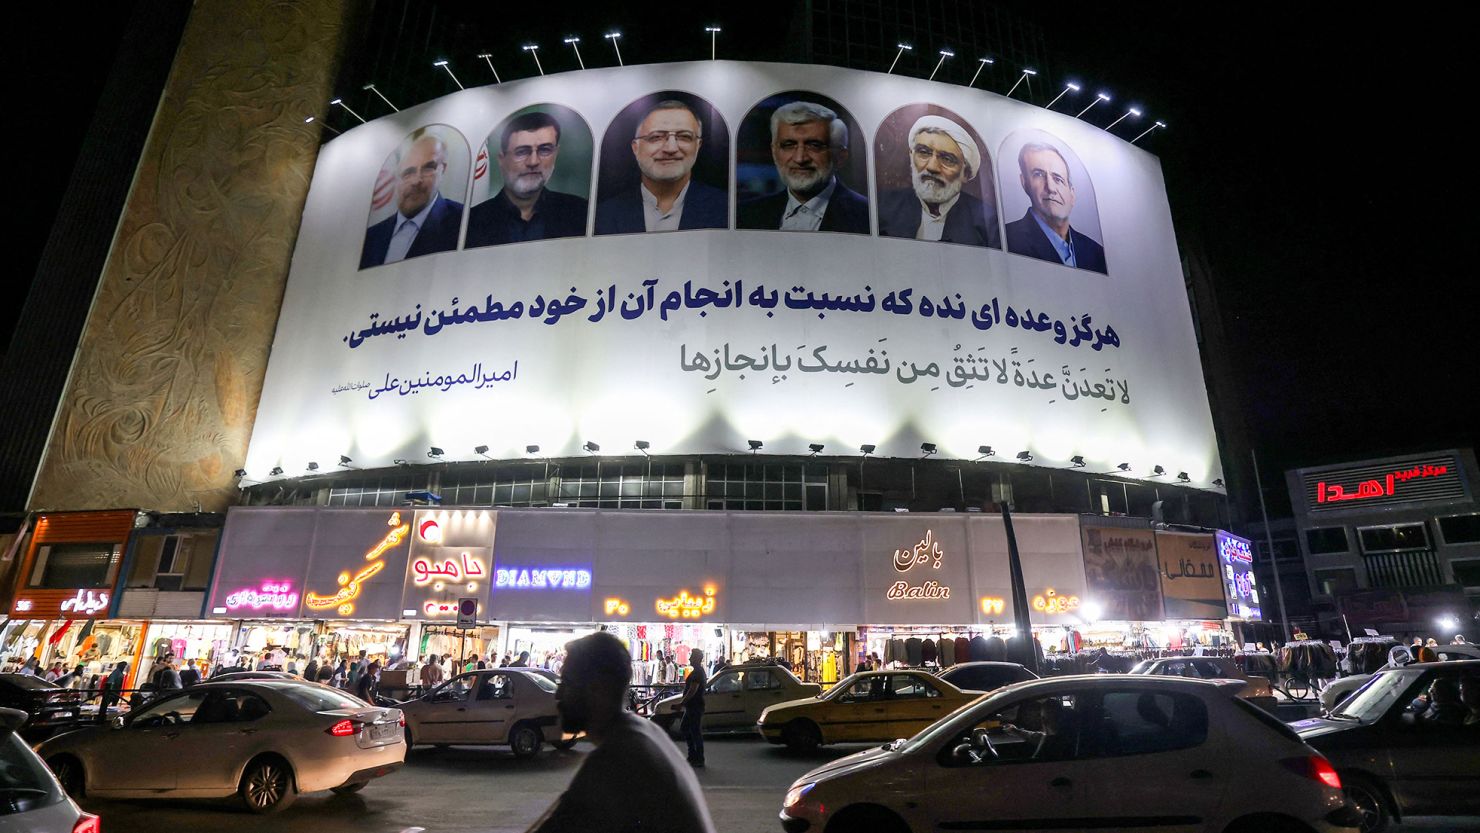 Vehicles move past a billboard displaying the faces of the six candidates running in the Iranian presidential election, in Valiasr Square, central Tehran, Iran on June 17.